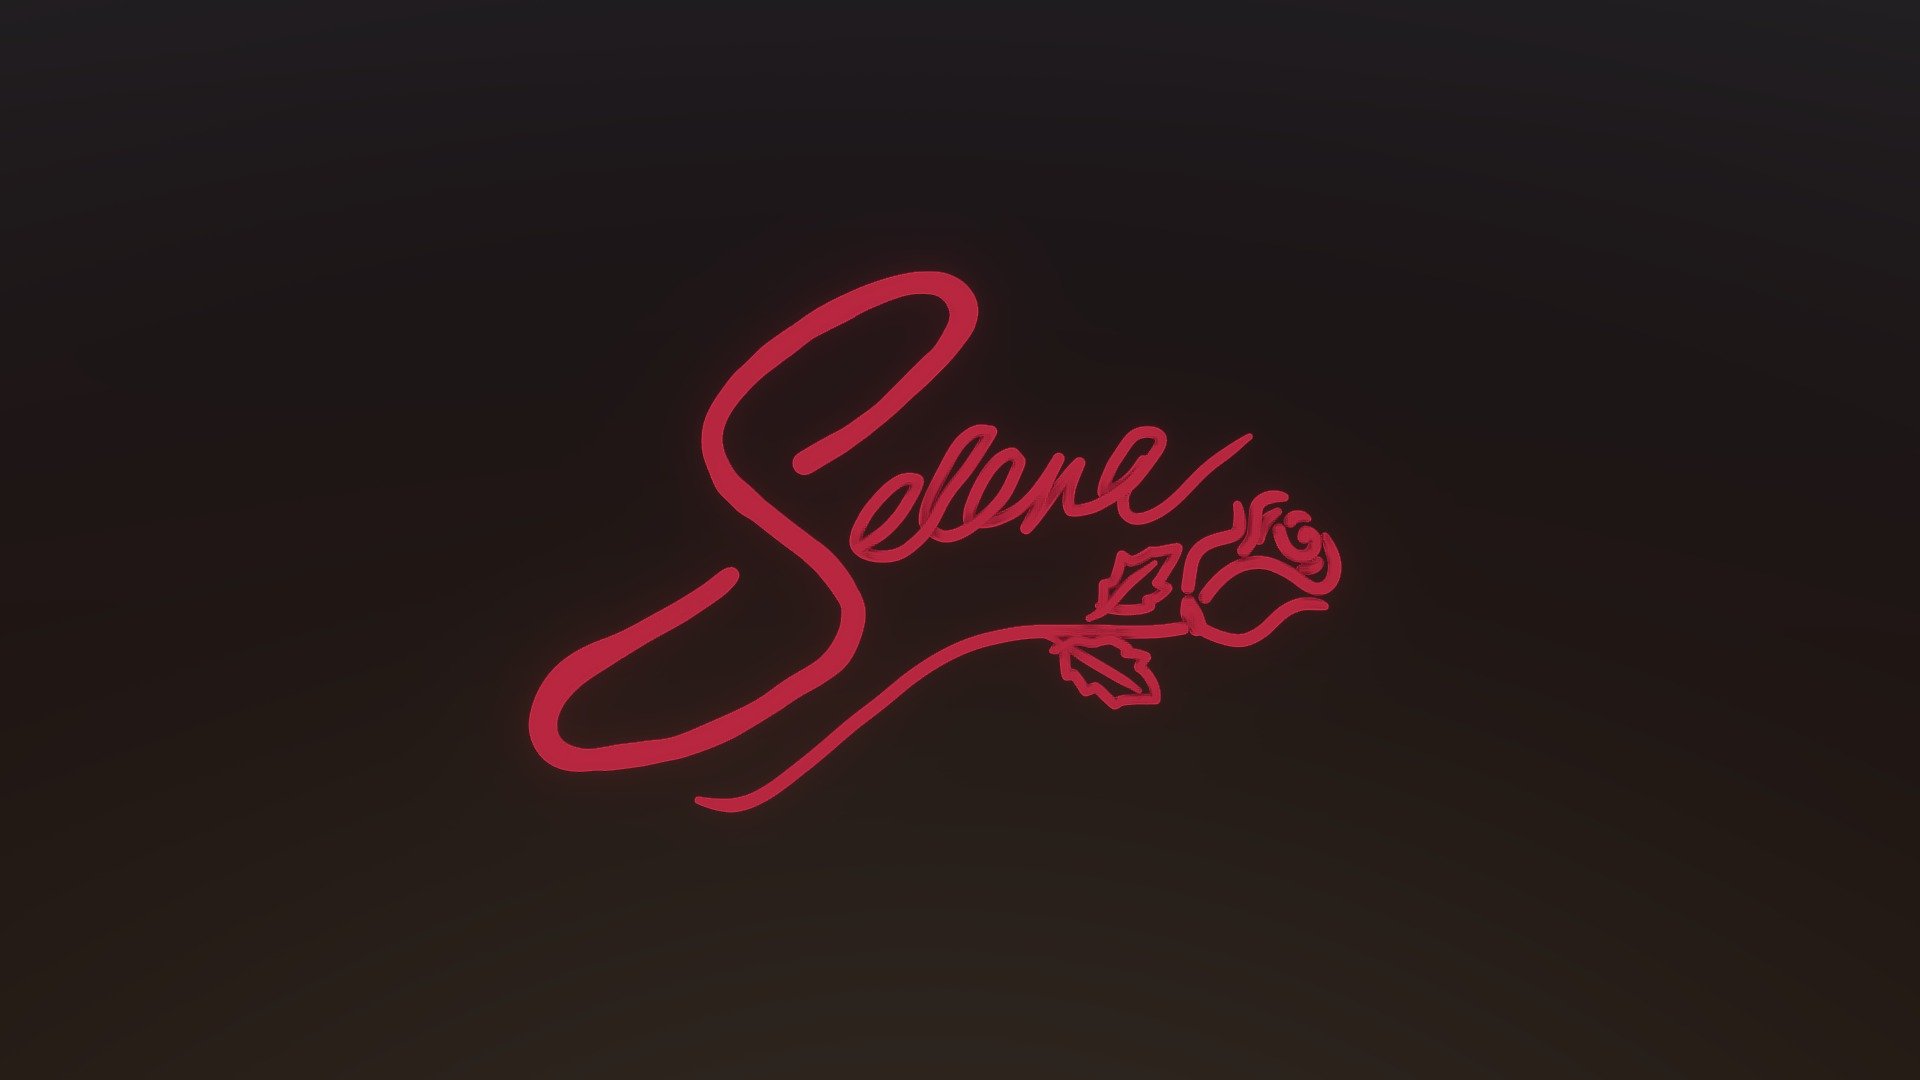 Selena Quintanilla was famously known to be a singer and songwriter. 